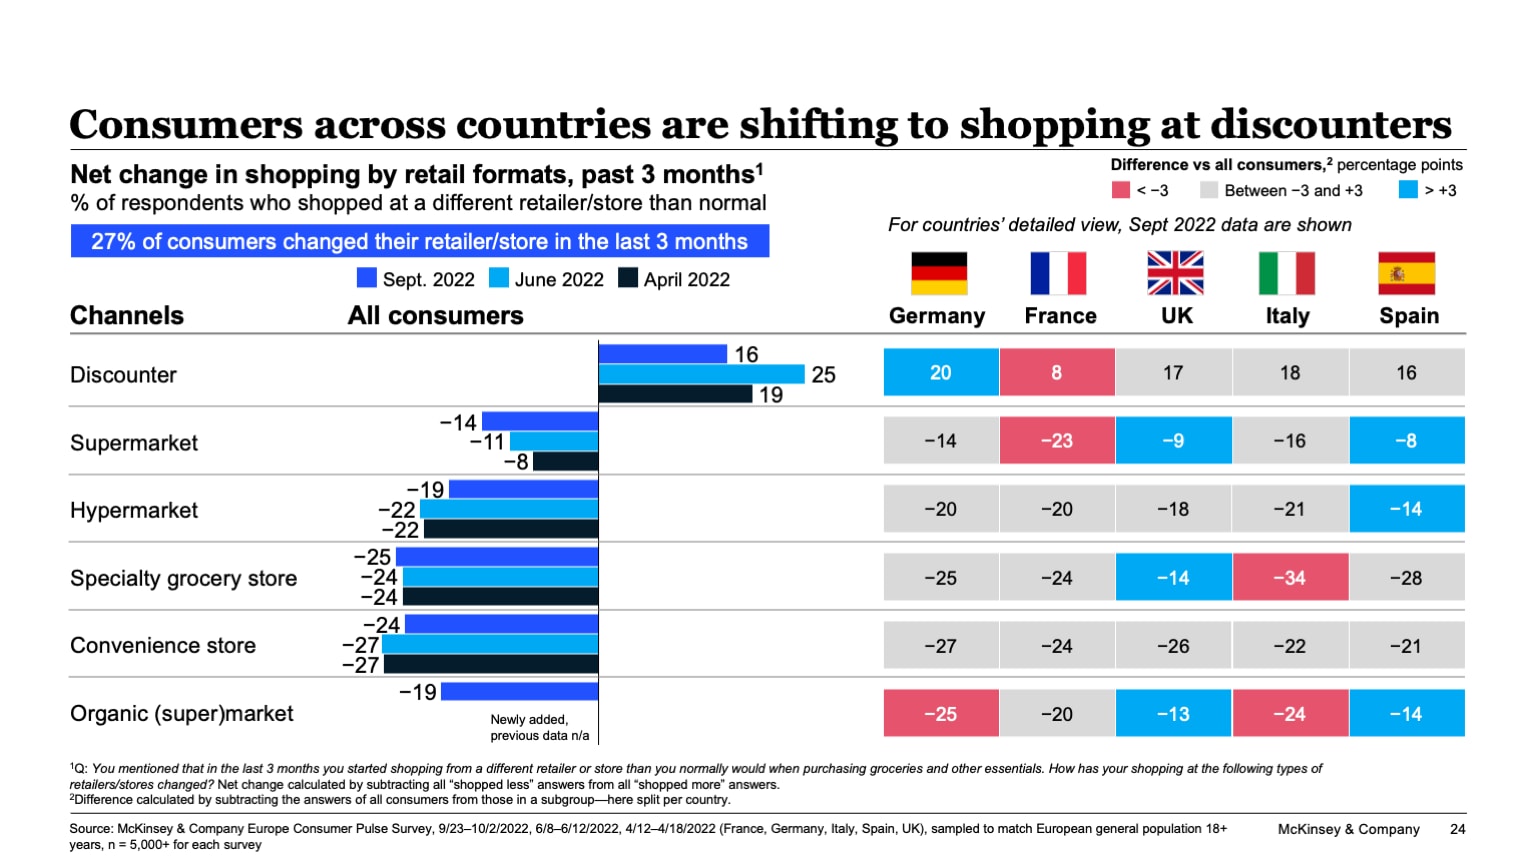 Consumers across countries are shifting to shopping at discounters